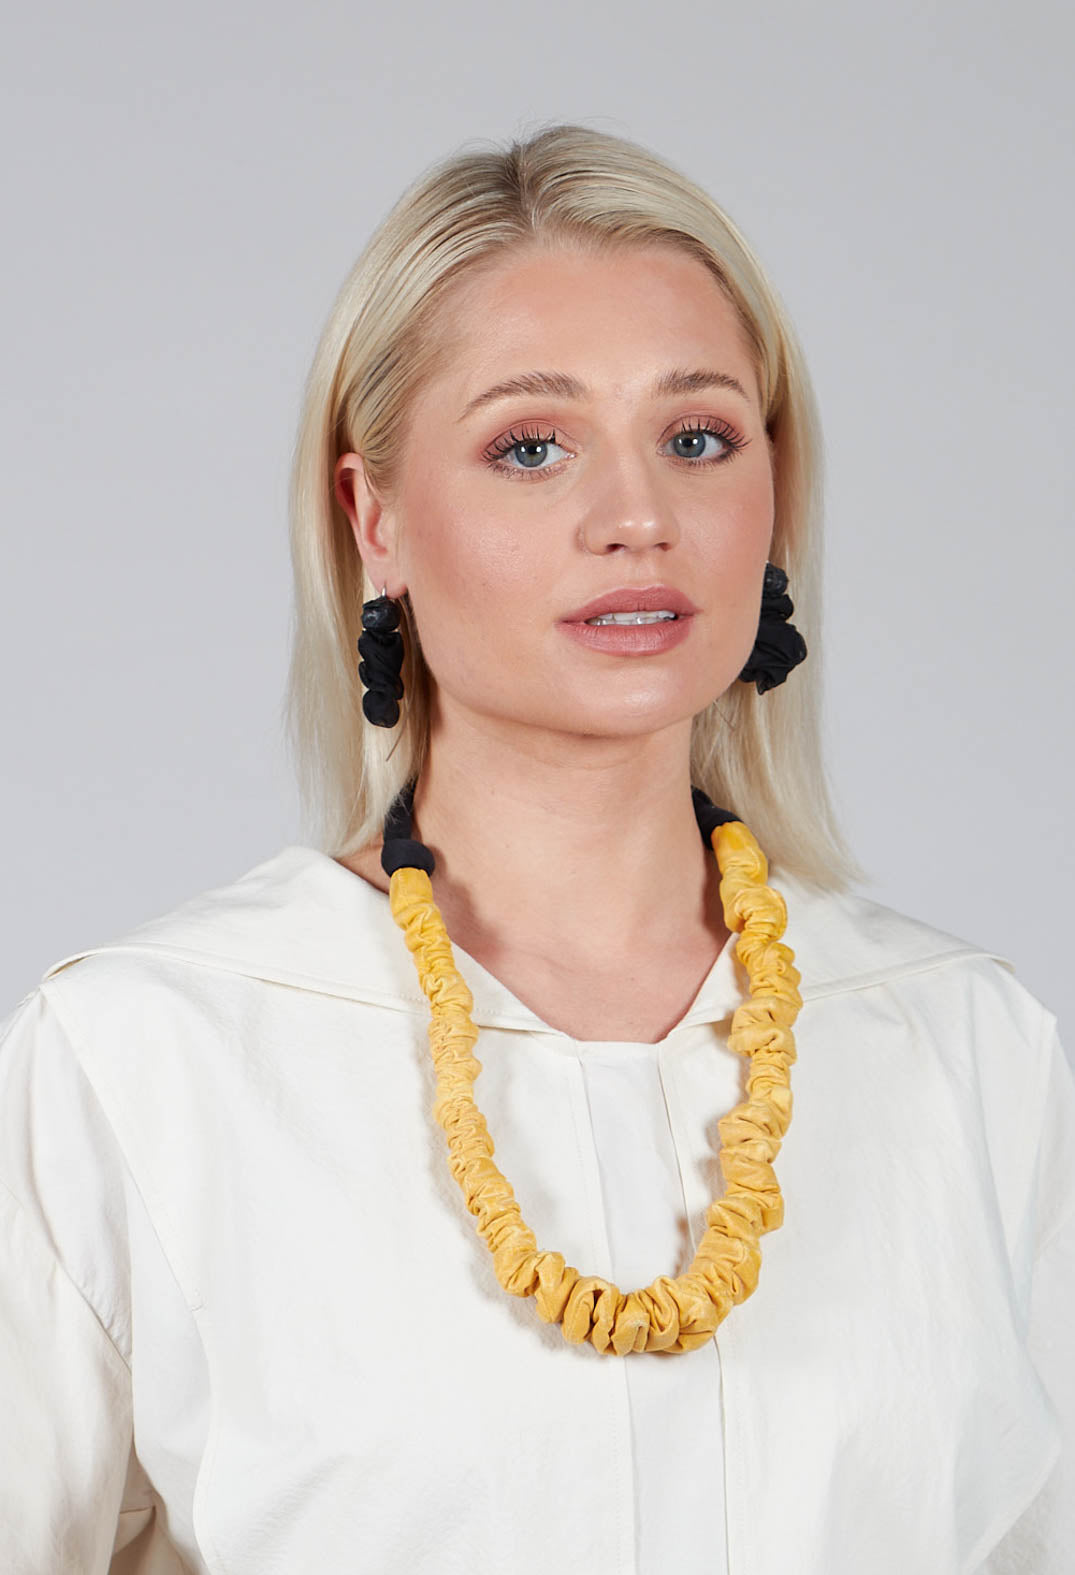 Ruched Effect Necklace in Yellow